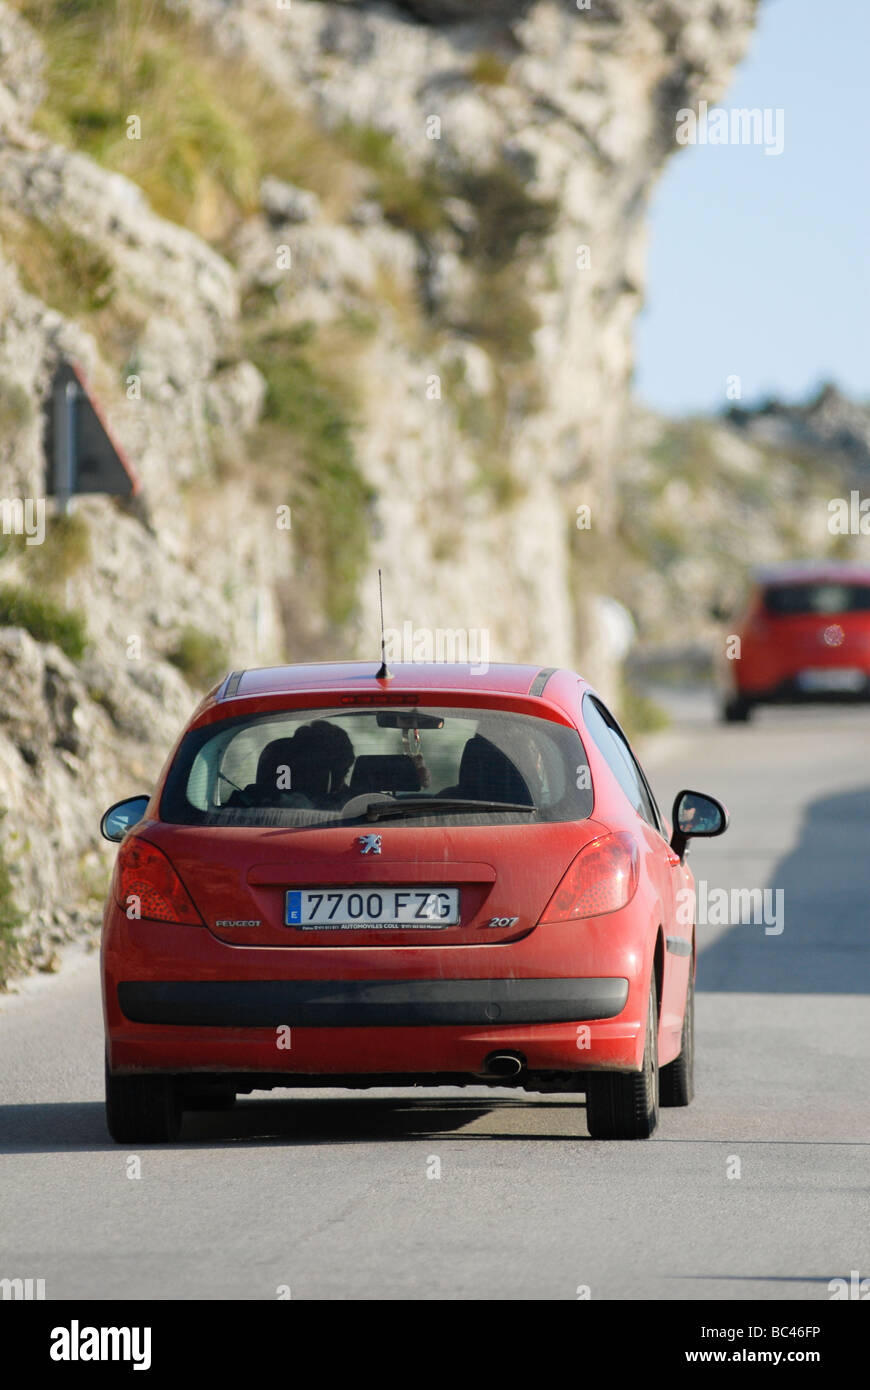 Rear view of a red peugeot 207 car driving along a road in Spain Stock Photo